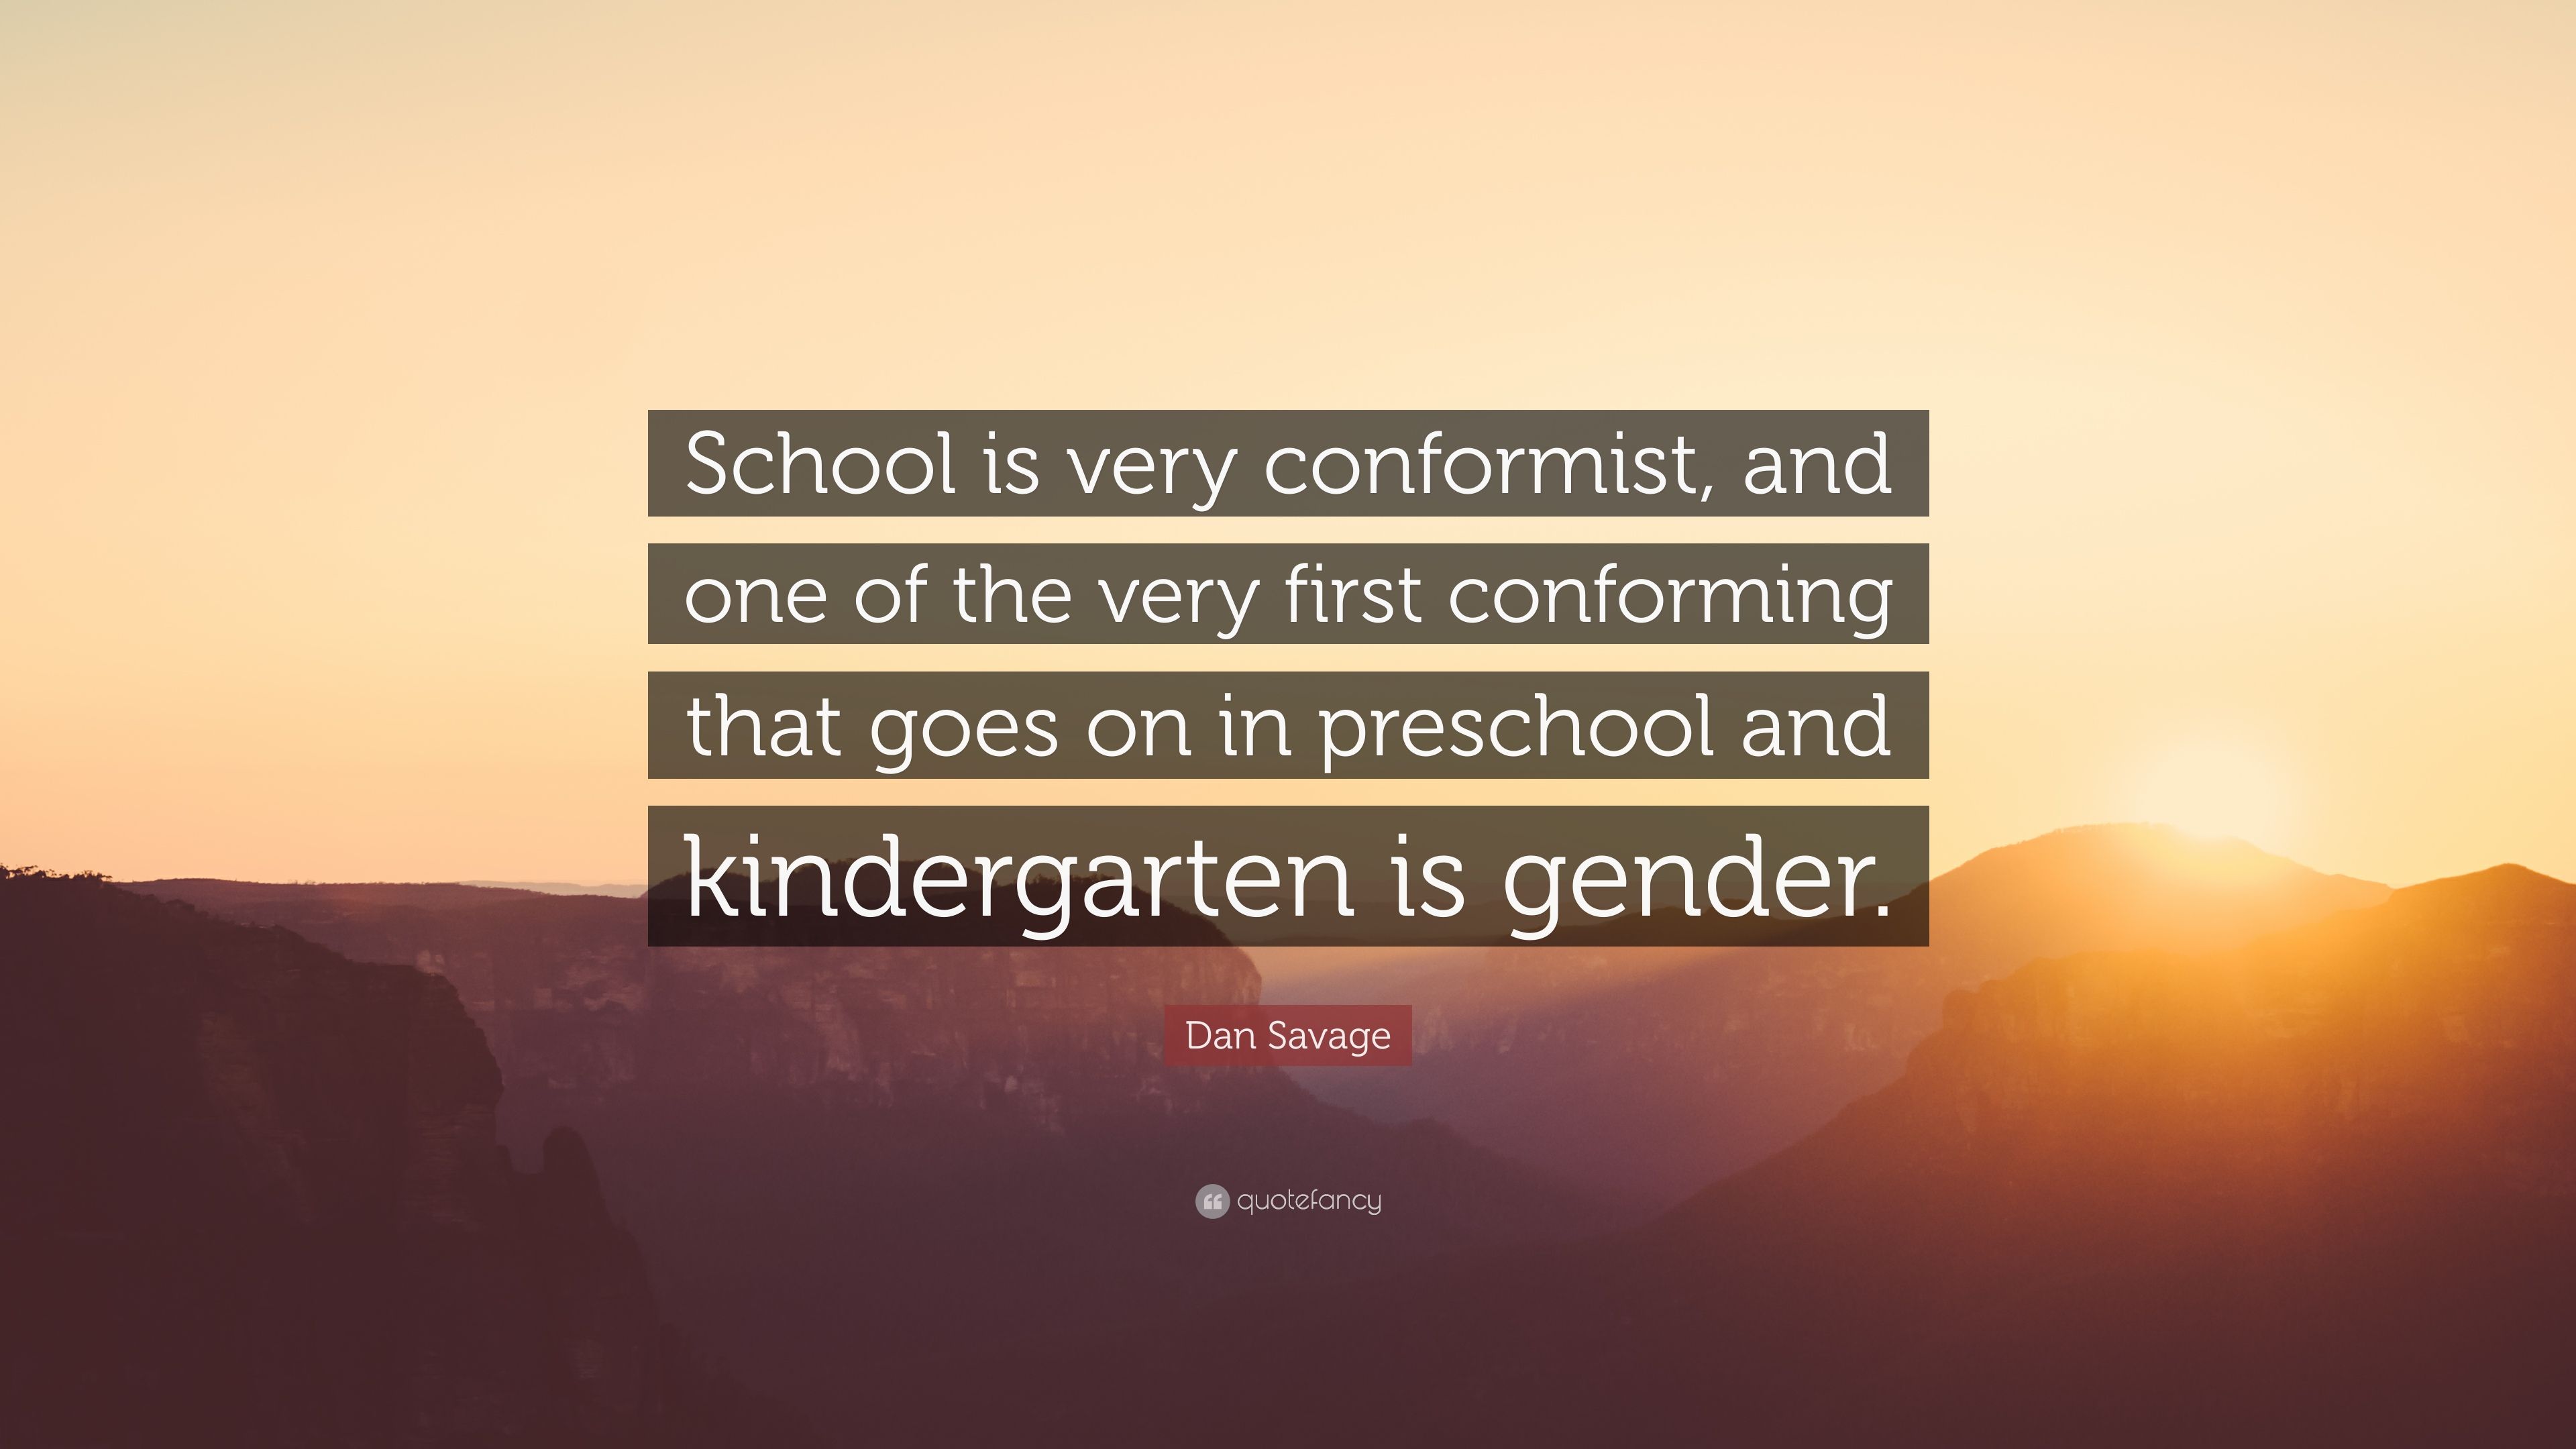 Dan Savage Quote: “School is very conformist, and one of the very first conforming that goes on in preschool and kindergarten is gender.” (7 wallpaper)